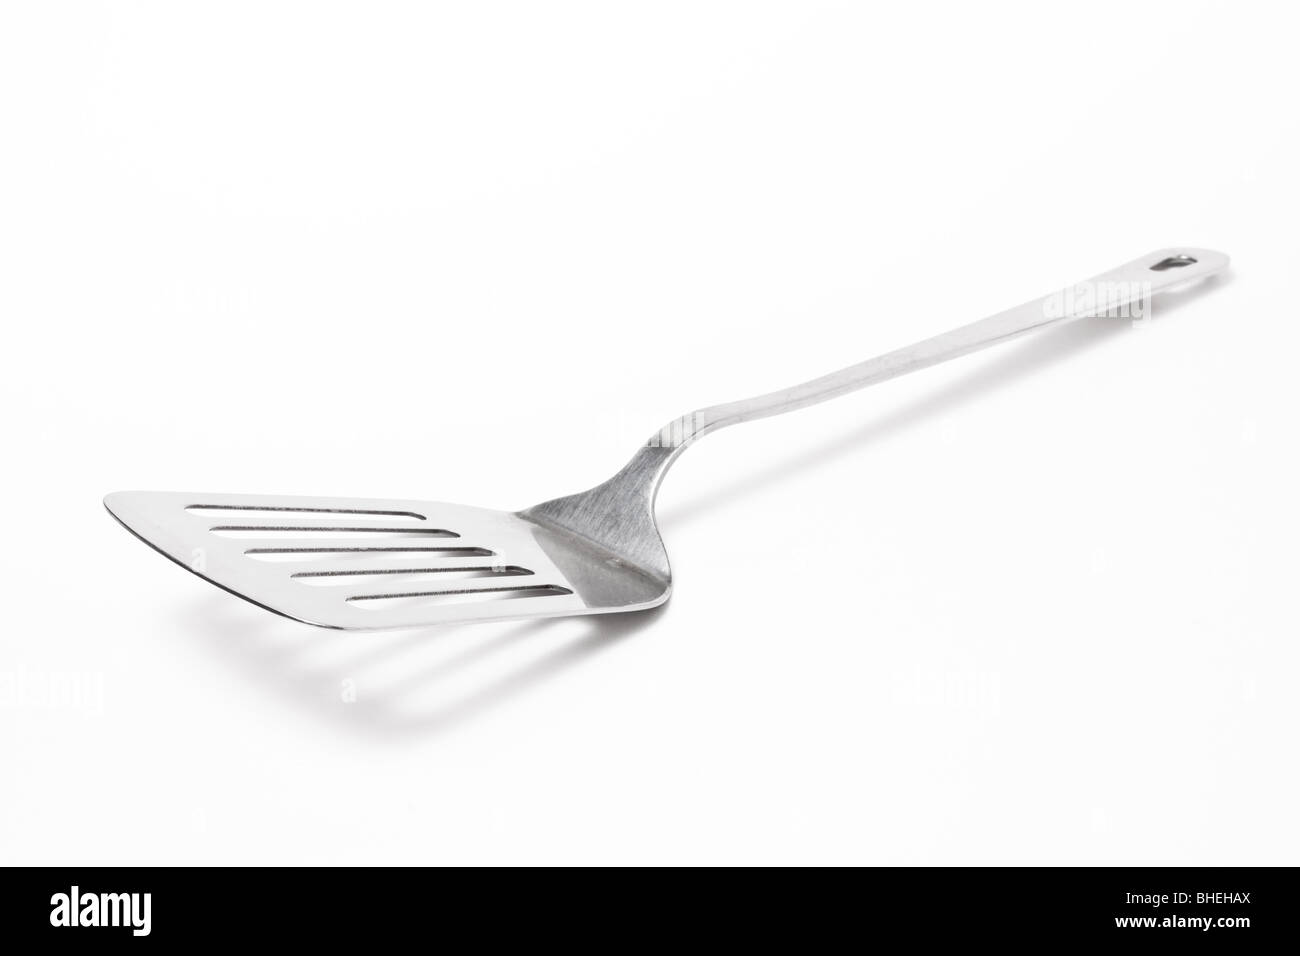 Large Stainless steel Kitchen spatula isolated against white background. Stock Photo